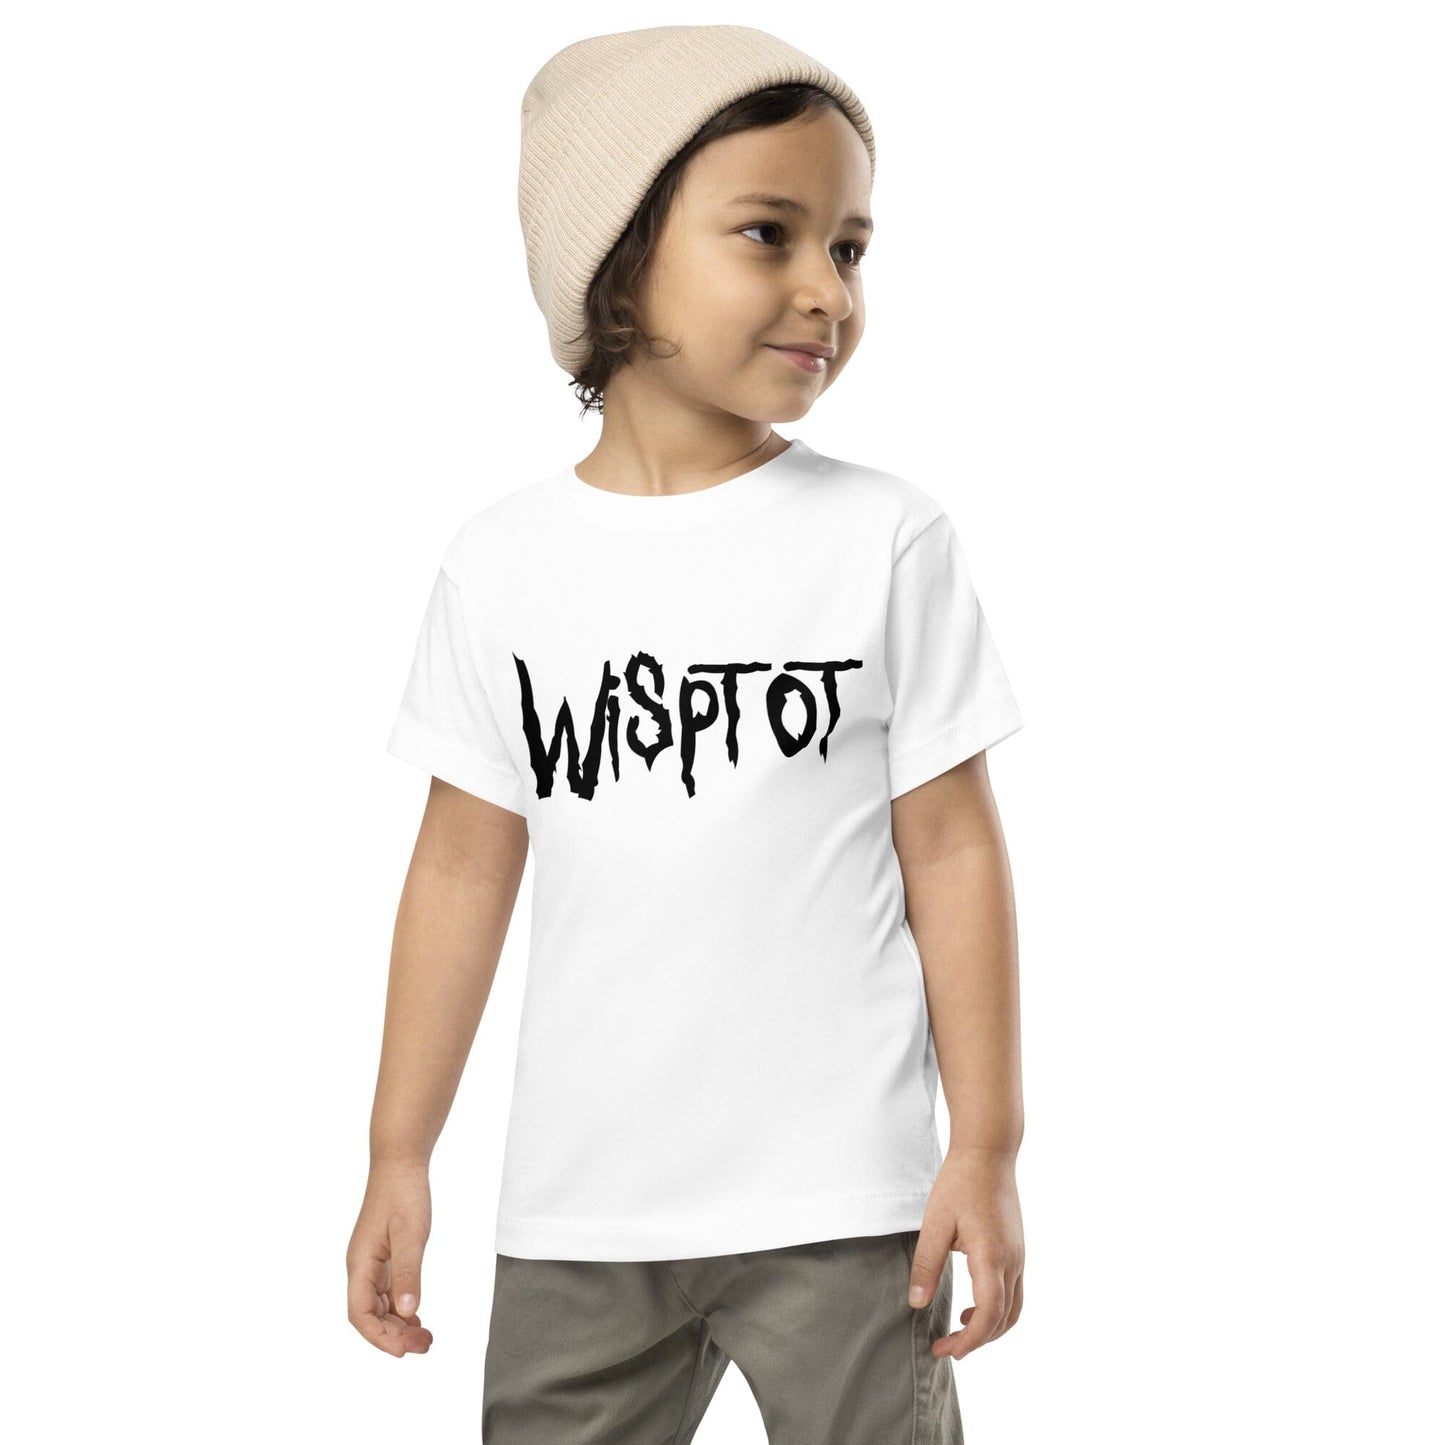 WispTot TODDLER T-Shirt [Unfoiled] (All net proceeds go to equally to Kitty CrusAIDe and Rags to Riches Animal Rescue) JoyousJoyfulJoyness White 2T 